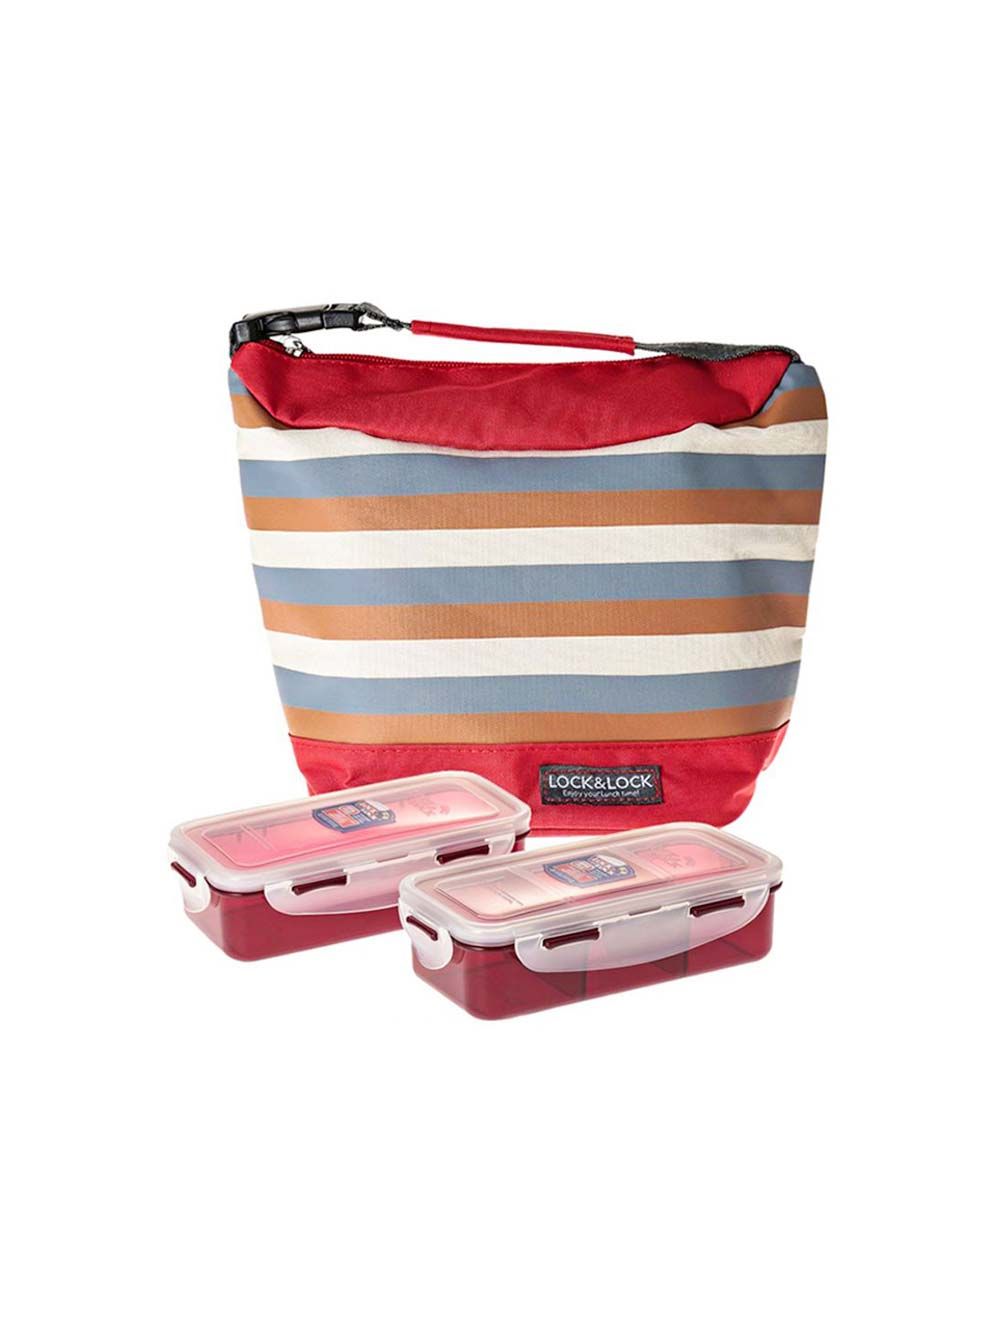 Lock & Lock Lunch Box 3pc-Set - 1pc Stripe Bag Red, 2pcs Food Container-HPL758S2SR